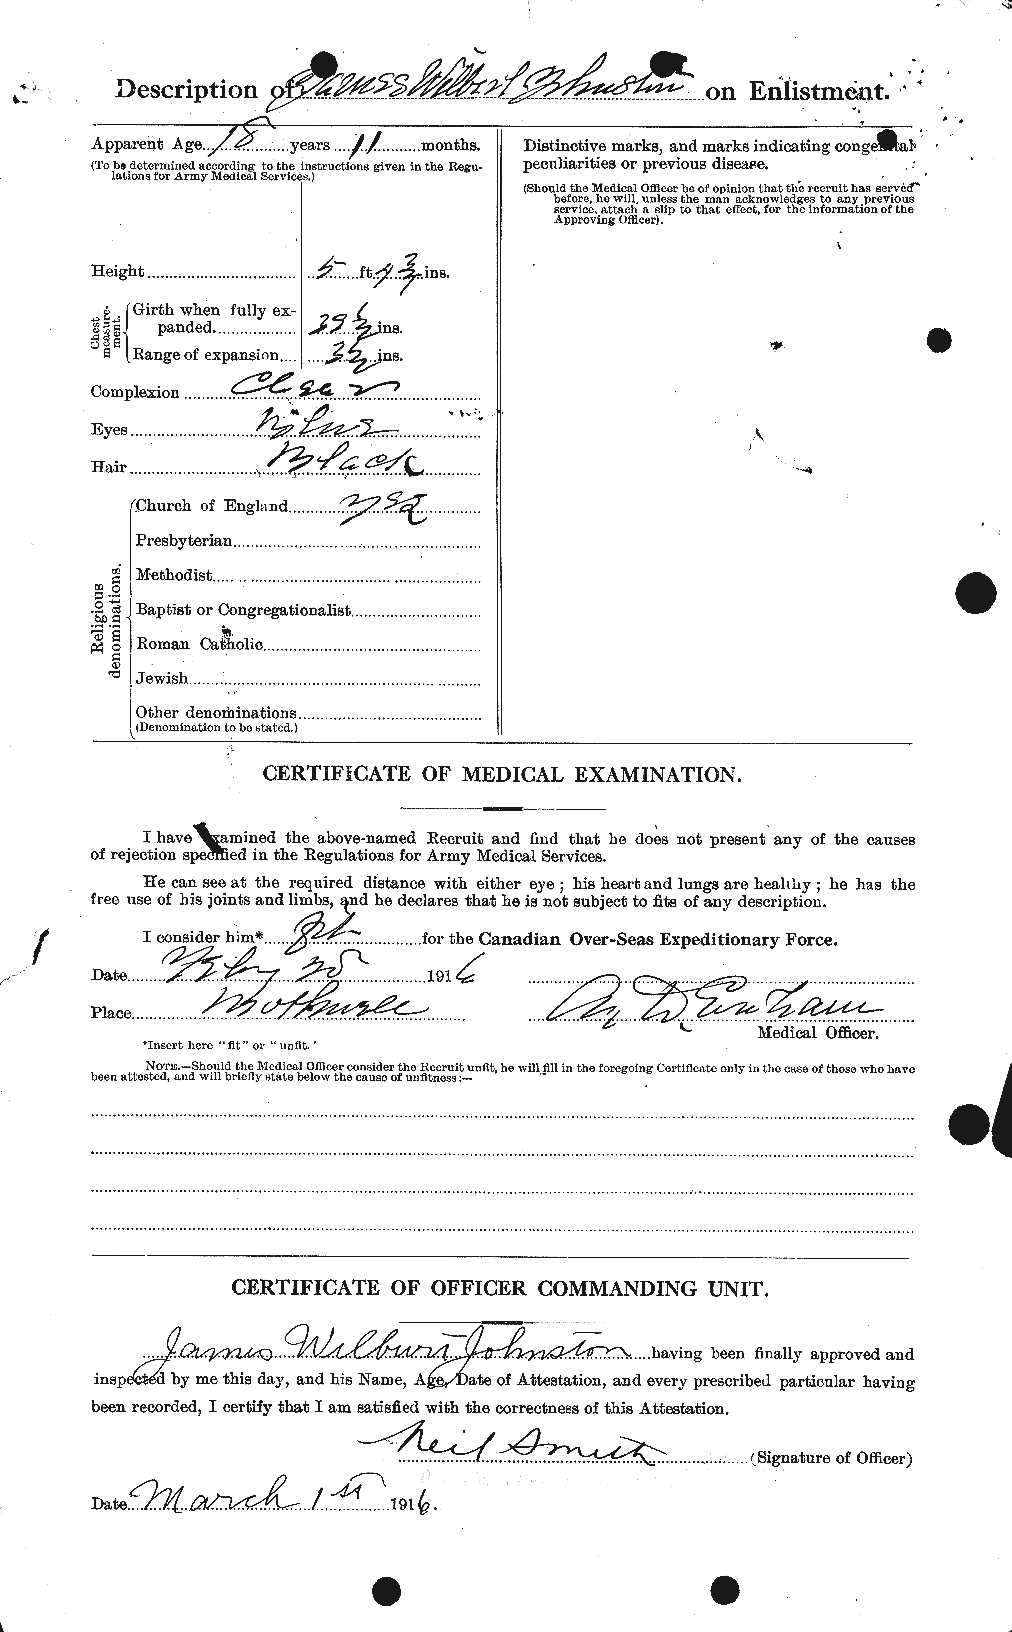 Personnel Records of the First World War - CEF 422756b